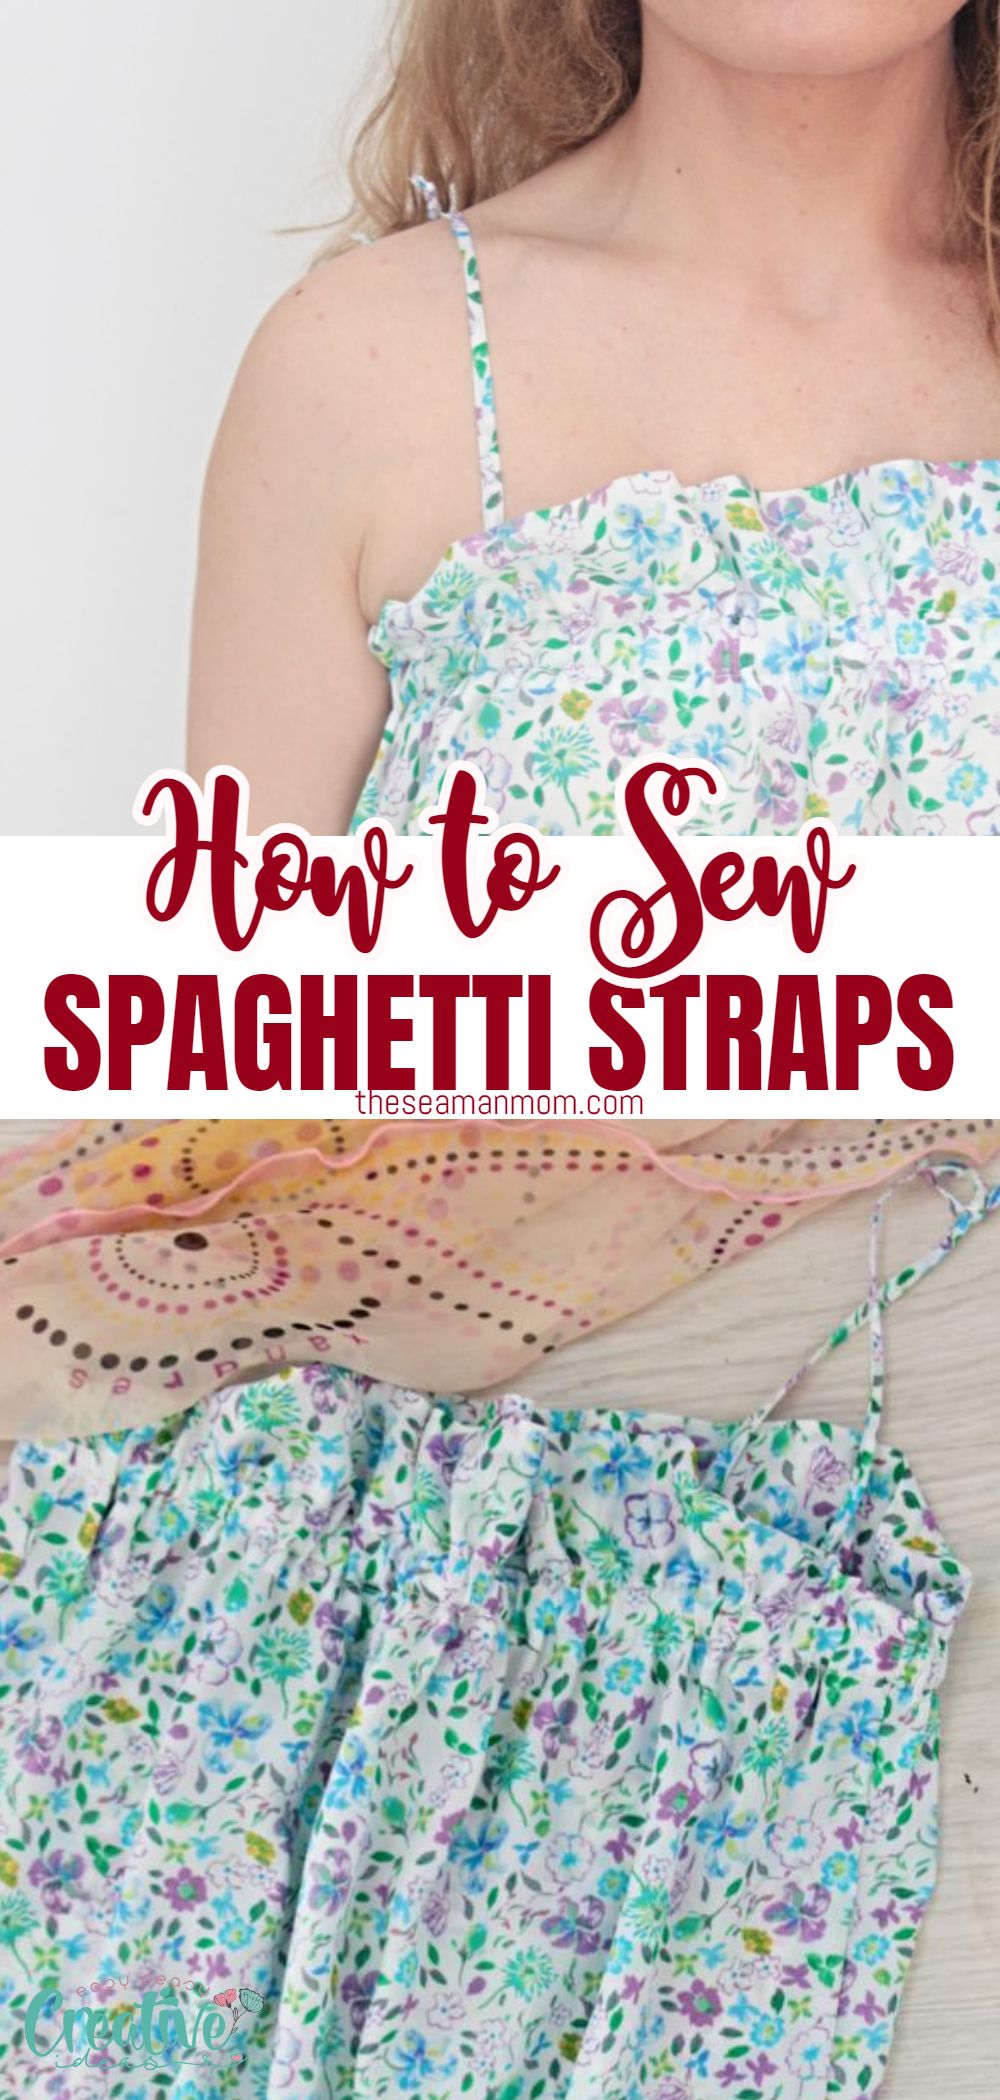 Spaghetti straps are a versatile and stylish addition to any outfit. They can be dressy or casual, and they add a touch of elegance to any look. With this easy tutorial, you can make spaghetti straps for any garment in just minutes. You’ll love the results! via @petroneagu